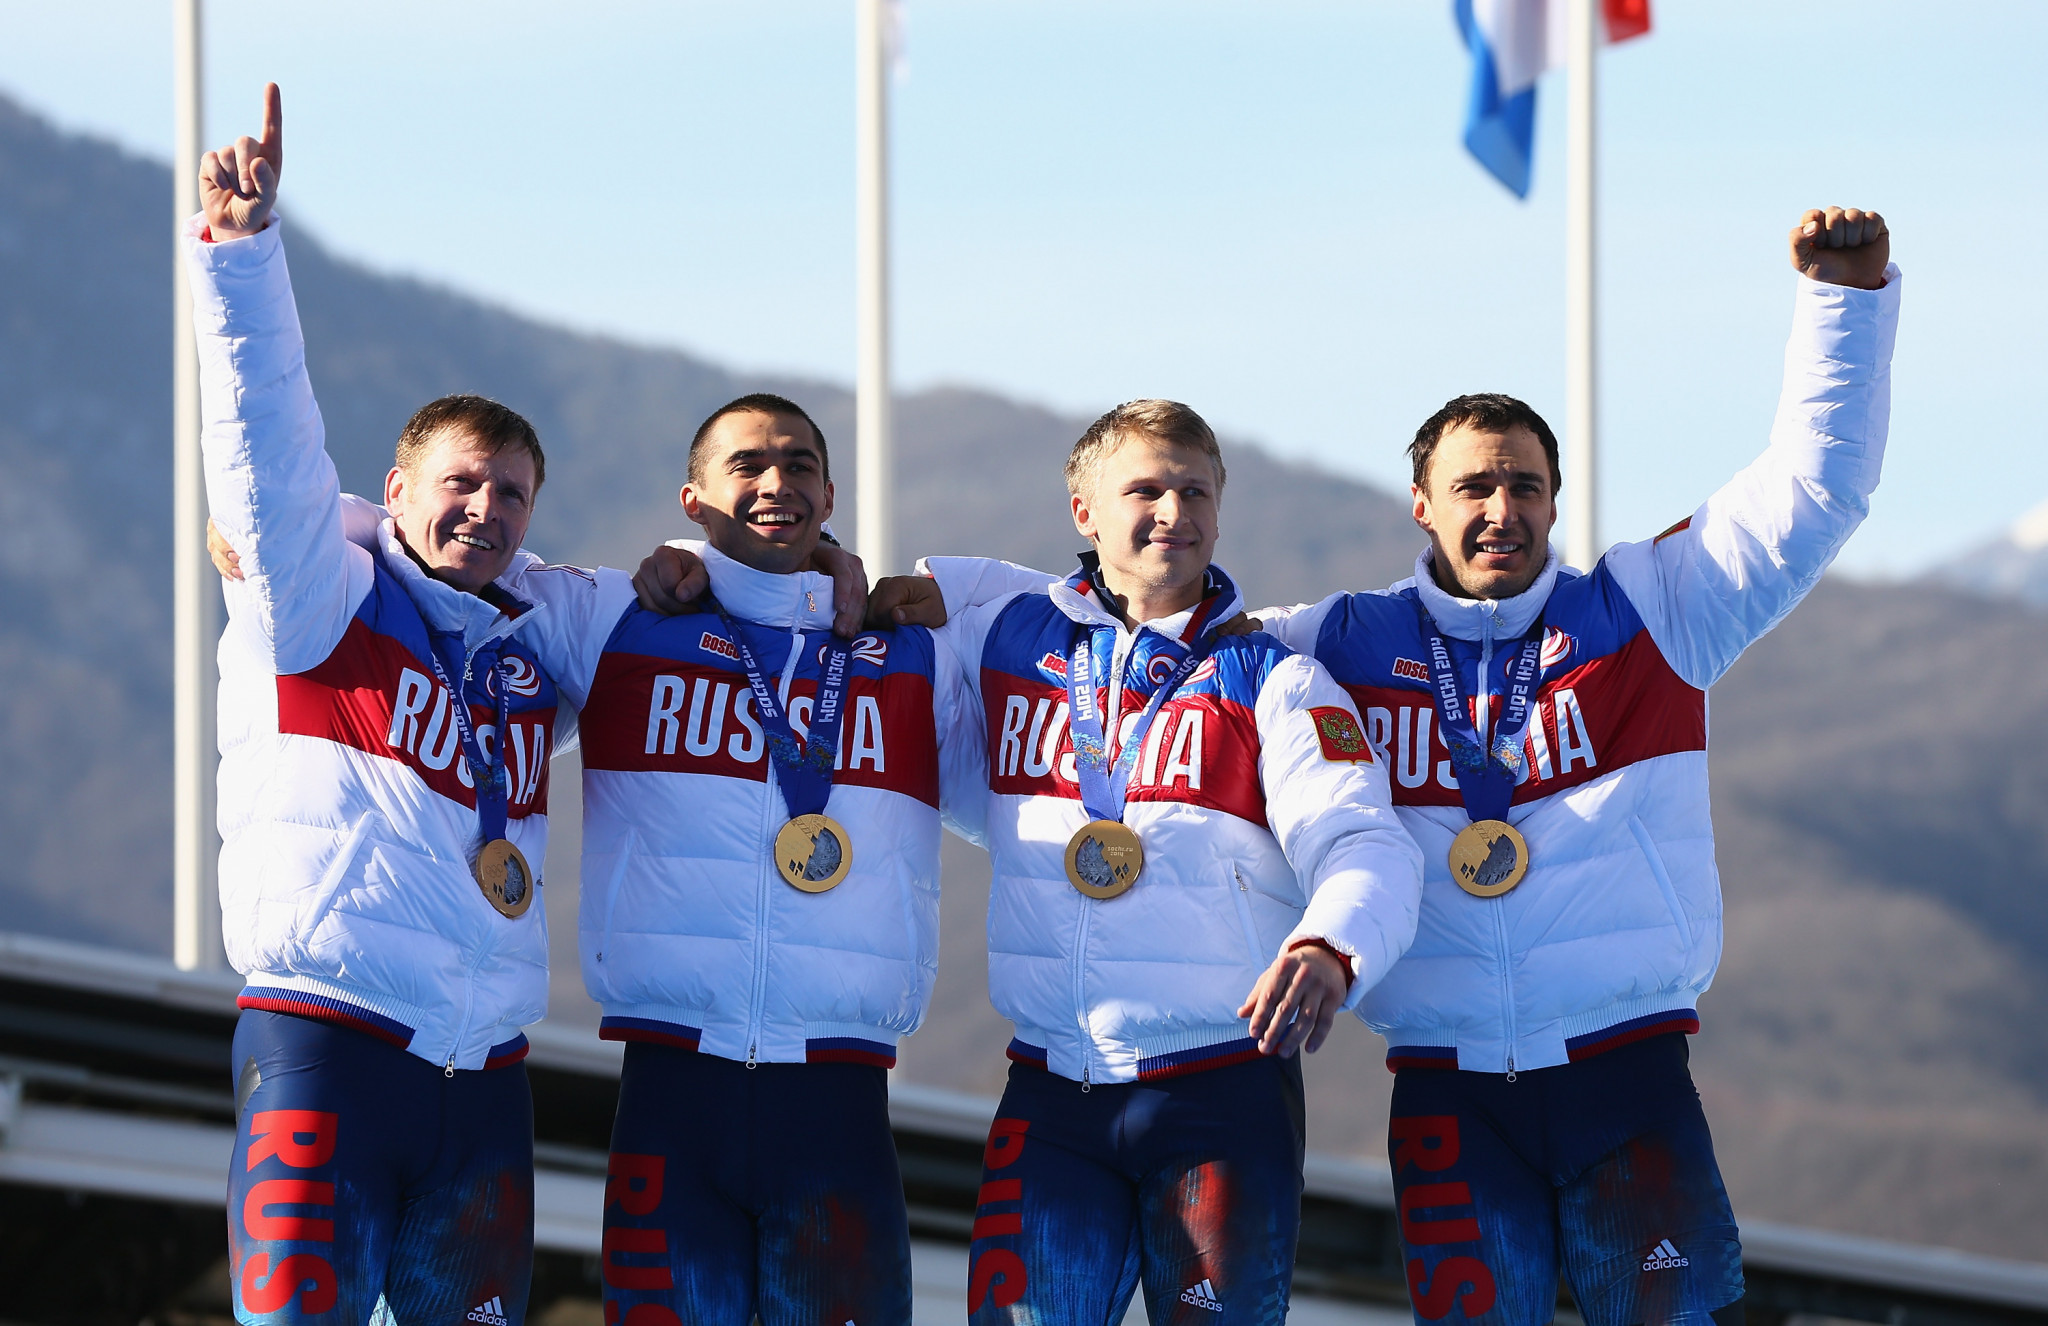 Russia were stripped of the men's two and four-man bobsleigh golds at Sochi 2014 but the medals are yet to be returned ©Getty Images